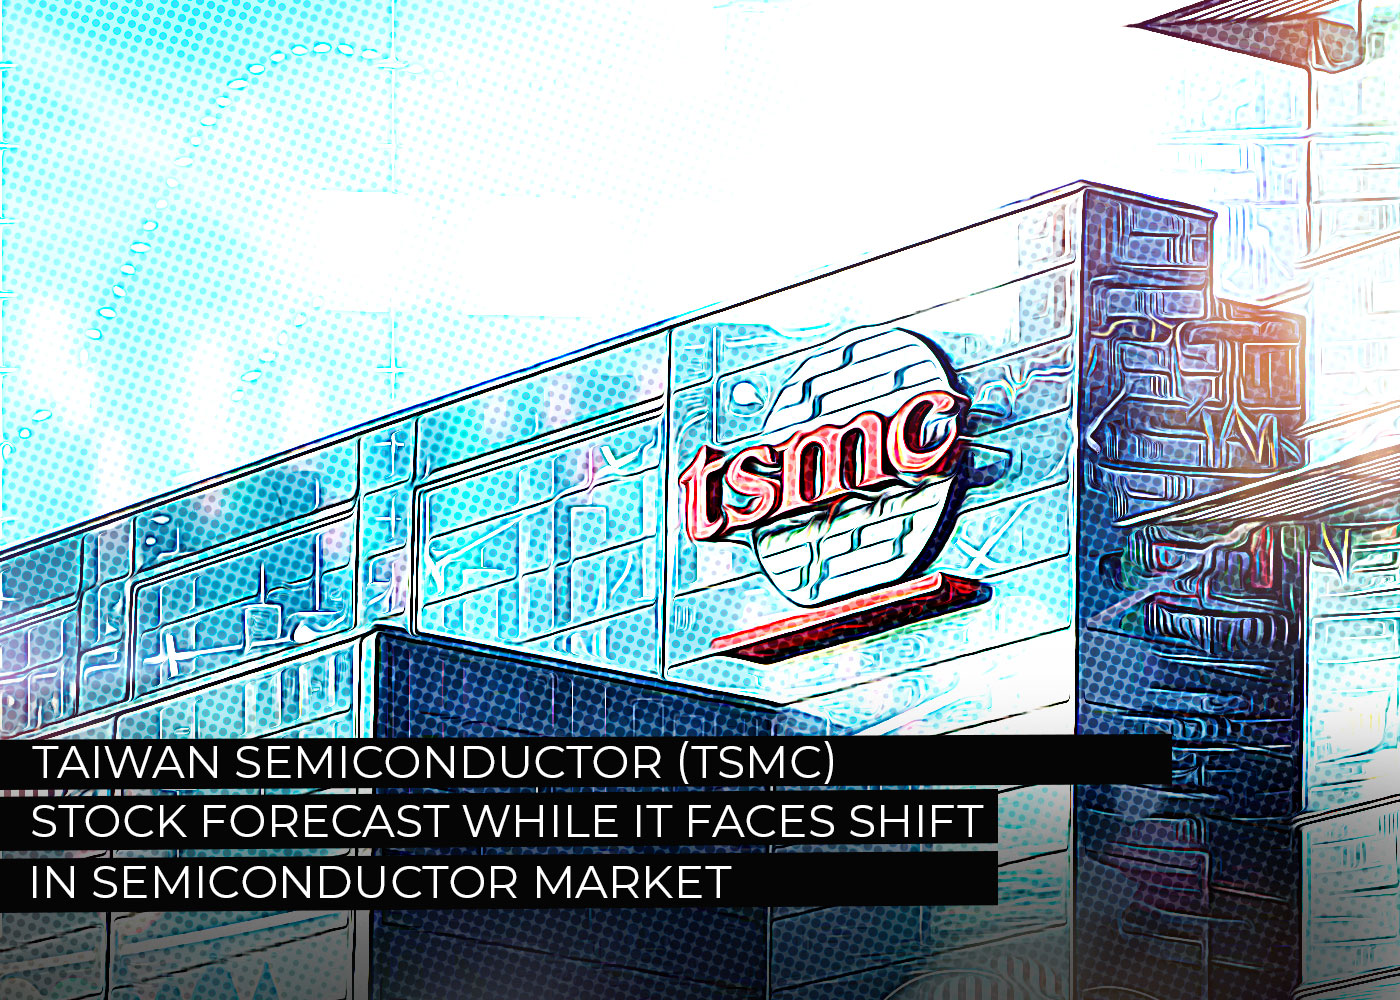 Taiwan-Semiconductor-(TSMC)-Stock-Forecast-While-It-Faces-Shift-in-Semiconductor-Market-